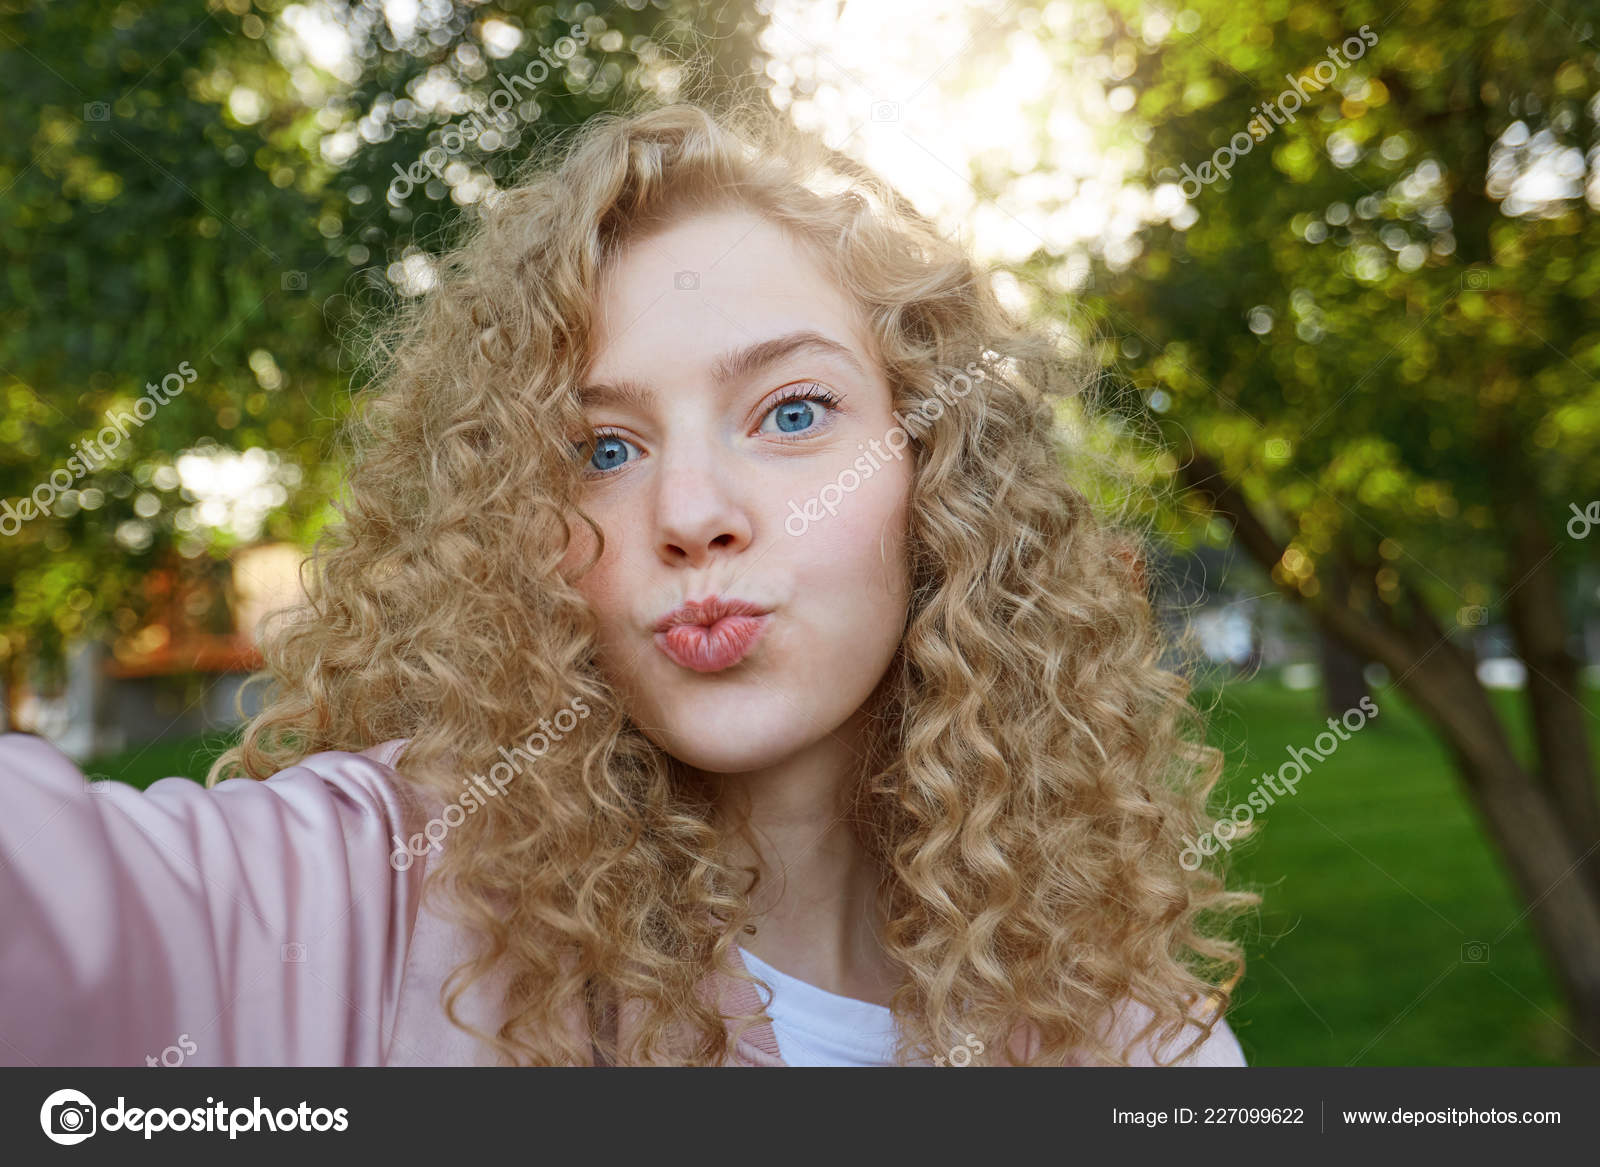 Curly hair and blue eyes on light complexion - wide 8